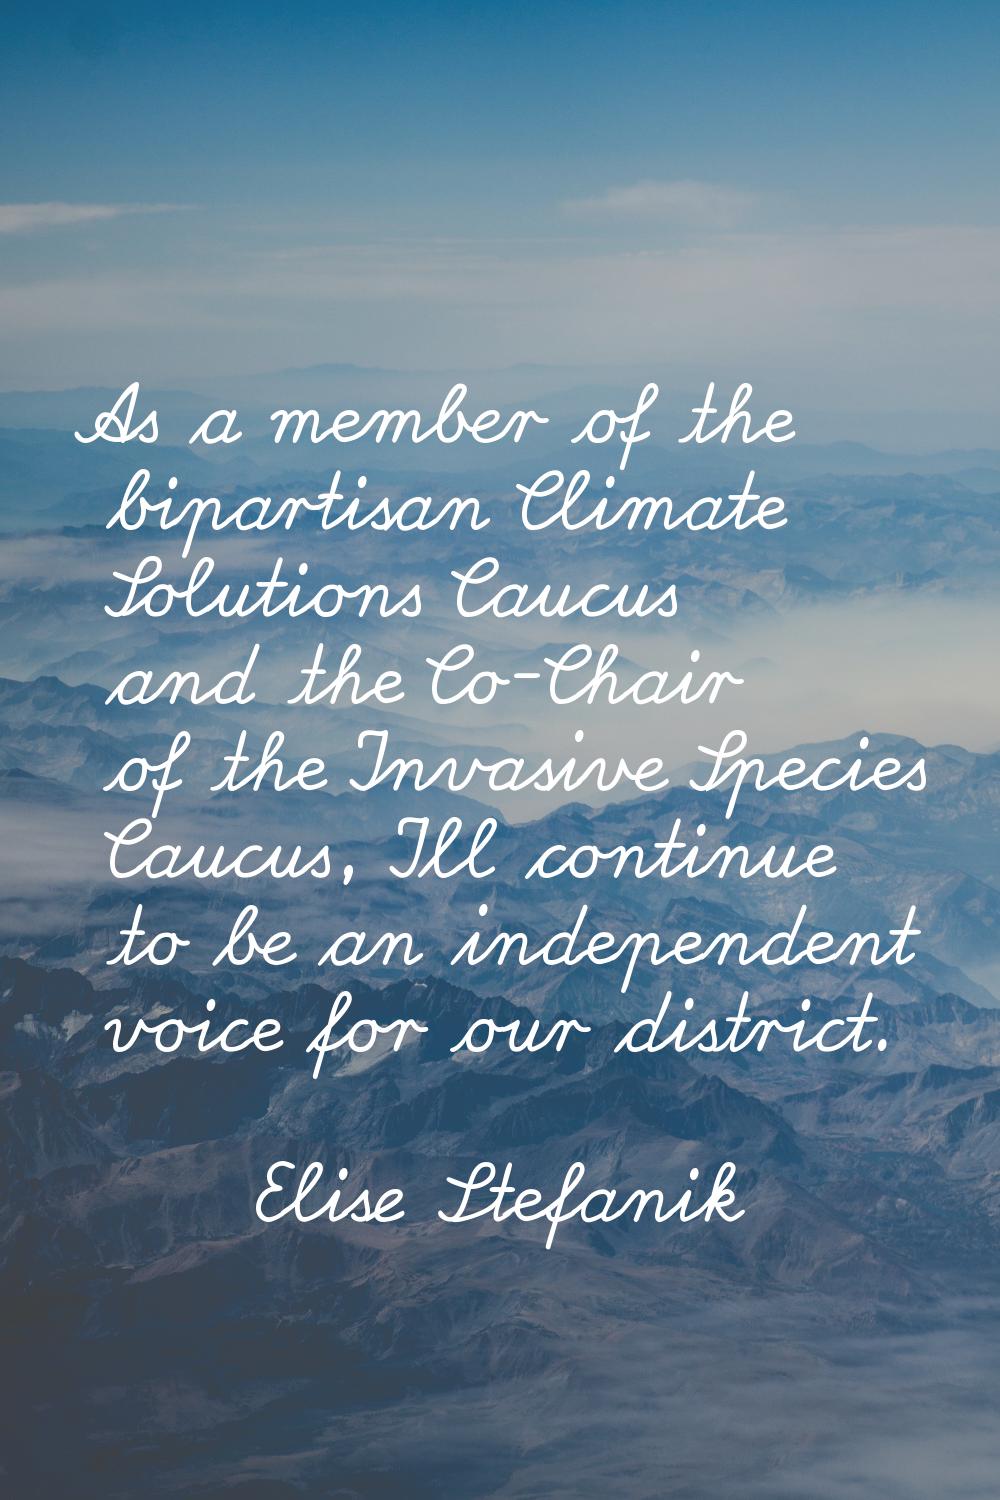 As a member of the bipartisan Climate Solutions Caucus and the Co-Chair of the Invasive Species Cau